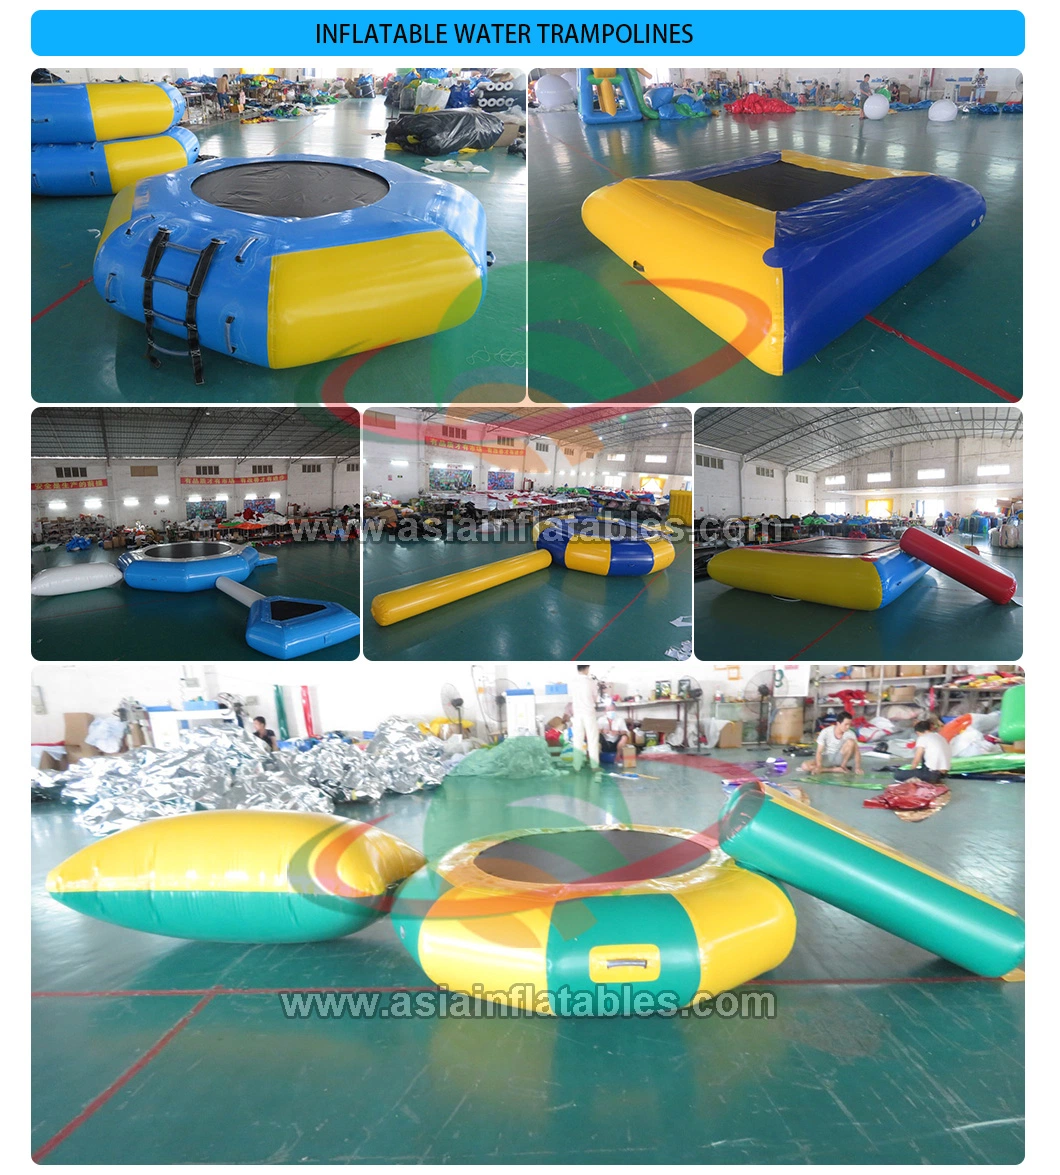 Inflatable Water Trampoline Water Park Trampoline with Slide